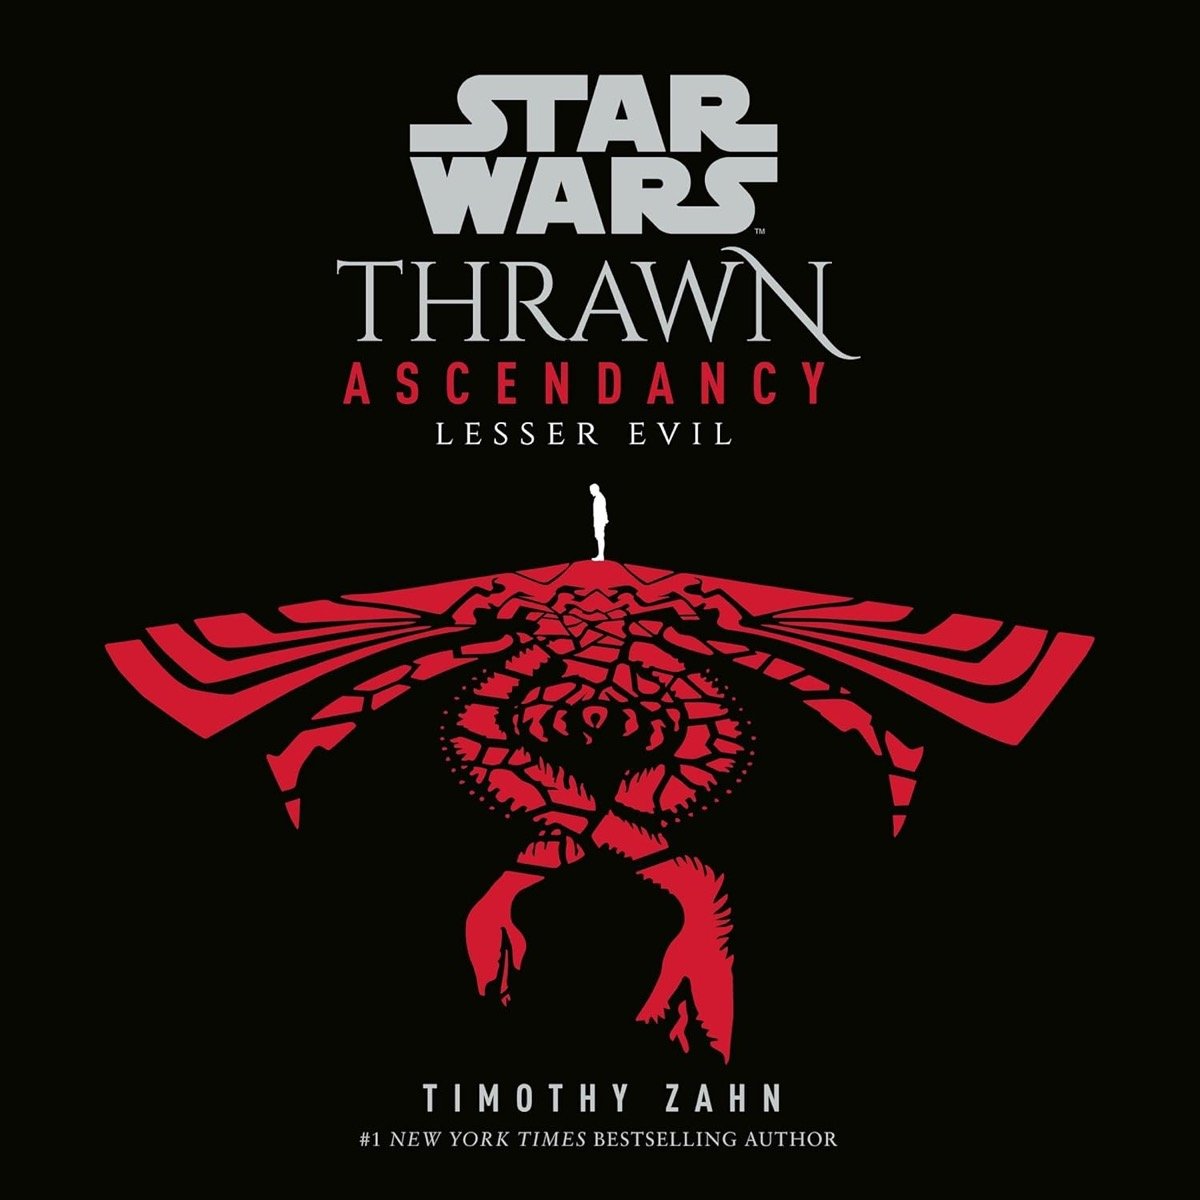 Cover art for Star Wars- Thrawn Ascendancy - Lesser Evil featuring Thrawn standing above snakes